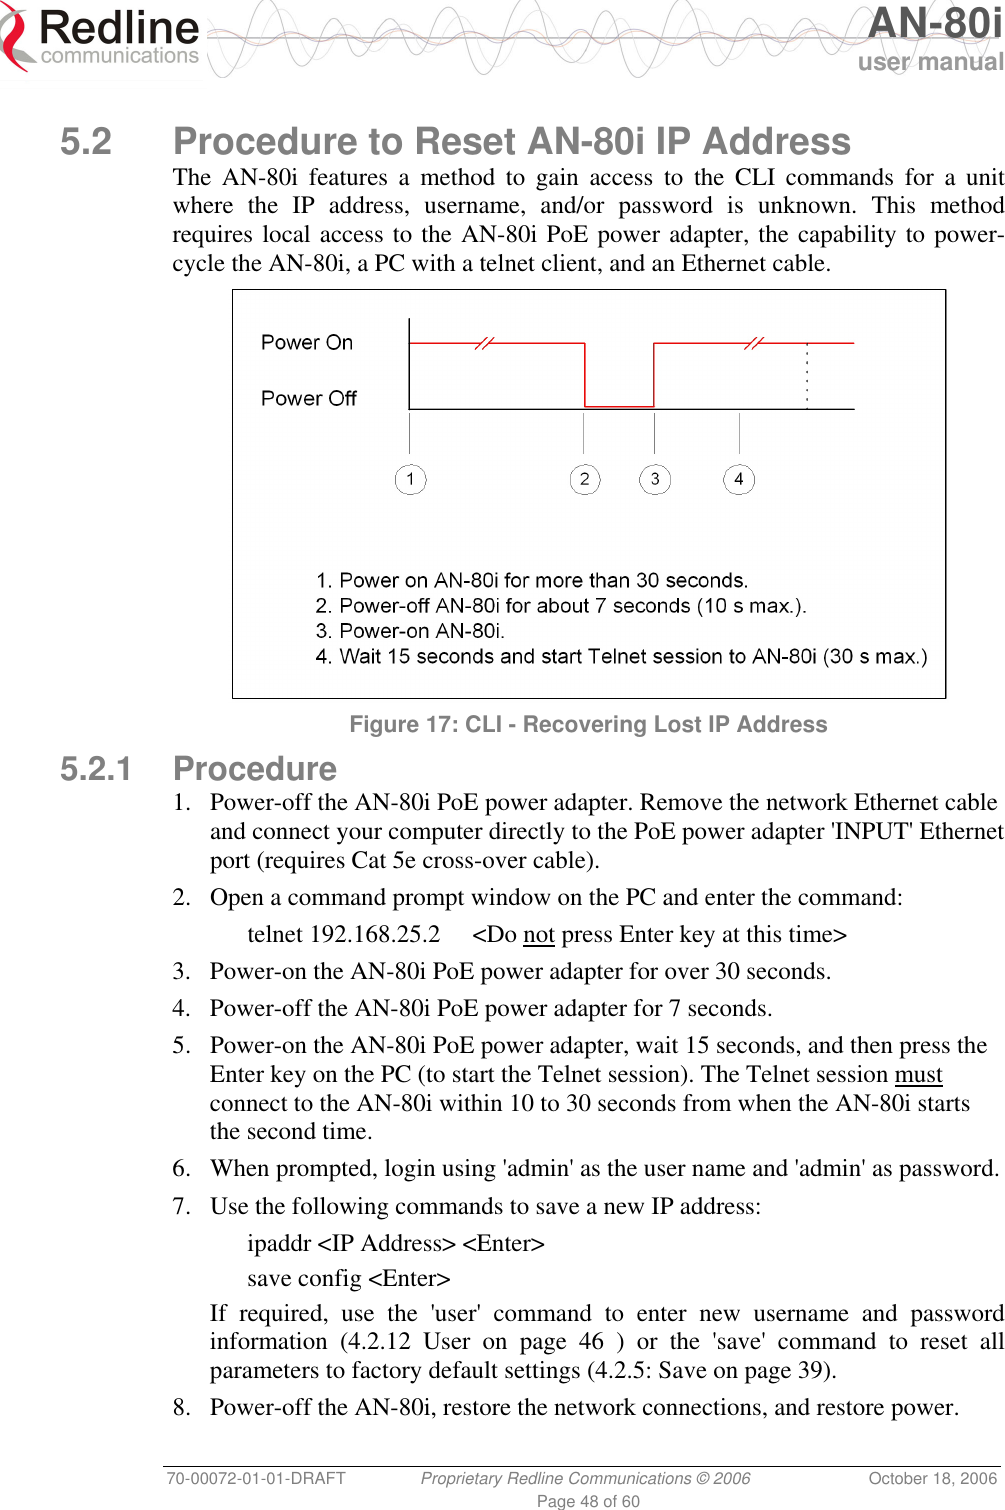   AN-80i user manual 70-00072-01-01-DRAFT  Proprietary Redline Communications © 2006  October 18, 2006 Page 48 of 60  5.2  Procedure to Reset AN-80i IP Address The AN-80i features a method to gain access to the CLI commands for a unit where the IP address, username, and/or password is unknown. This method requires local access to the AN-80i PoE power adapter, the capability to power-cycle the AN-80i, a PC with a telnet client, and an Ethernet cable.   Figure 17: CLI - Recovering Lost IP Address 5.2.1 Procedure 1.  Power-off the AN-80i PoE power adapter. Remove the network Ethernet cable and connect your computer directly to the PoE power adapter &apos;INPUT&apos; Ethernet port (requires Cat 5e cross-over cable). 2.  Open a command prompt window on the PC and enter the command:   telnet 192.168.25.2  &lt;Do not press Enter key at this time&gt; 3.  Power-on the AN-80i PoE power adapter for over 30 seconds. 4.  Power-off the AN-80i PoE power adapter for 7 seconds. 5.  Power-on the AN-80i PoE power adapter, wait 15 seconds, and then press the Enter key on the PC (to start the Telnet session). The Telnet session must connect to the AN-80i within 10 to 30 seconds from when the AN-80i starts the second time. 6.  When prompted, login using &apos;admin&apos; as the user name and &apos;admin&apos; as password. 7.  Use the following commands to save a new IP address:   ipaddr &lt;IP Address&gt; &lt;Enter&gt;  save config &lt;Enter&gt; If required, use the &apos;user&apos; command to enter new username and password information (4.2.12 User on page 46 ) or the &apos;save&apos; command to reset all parameters to factory default settings (4.2.5: Save on page 39). 8.  Power-off the AN-80i, restore the network connections, and restore power. 